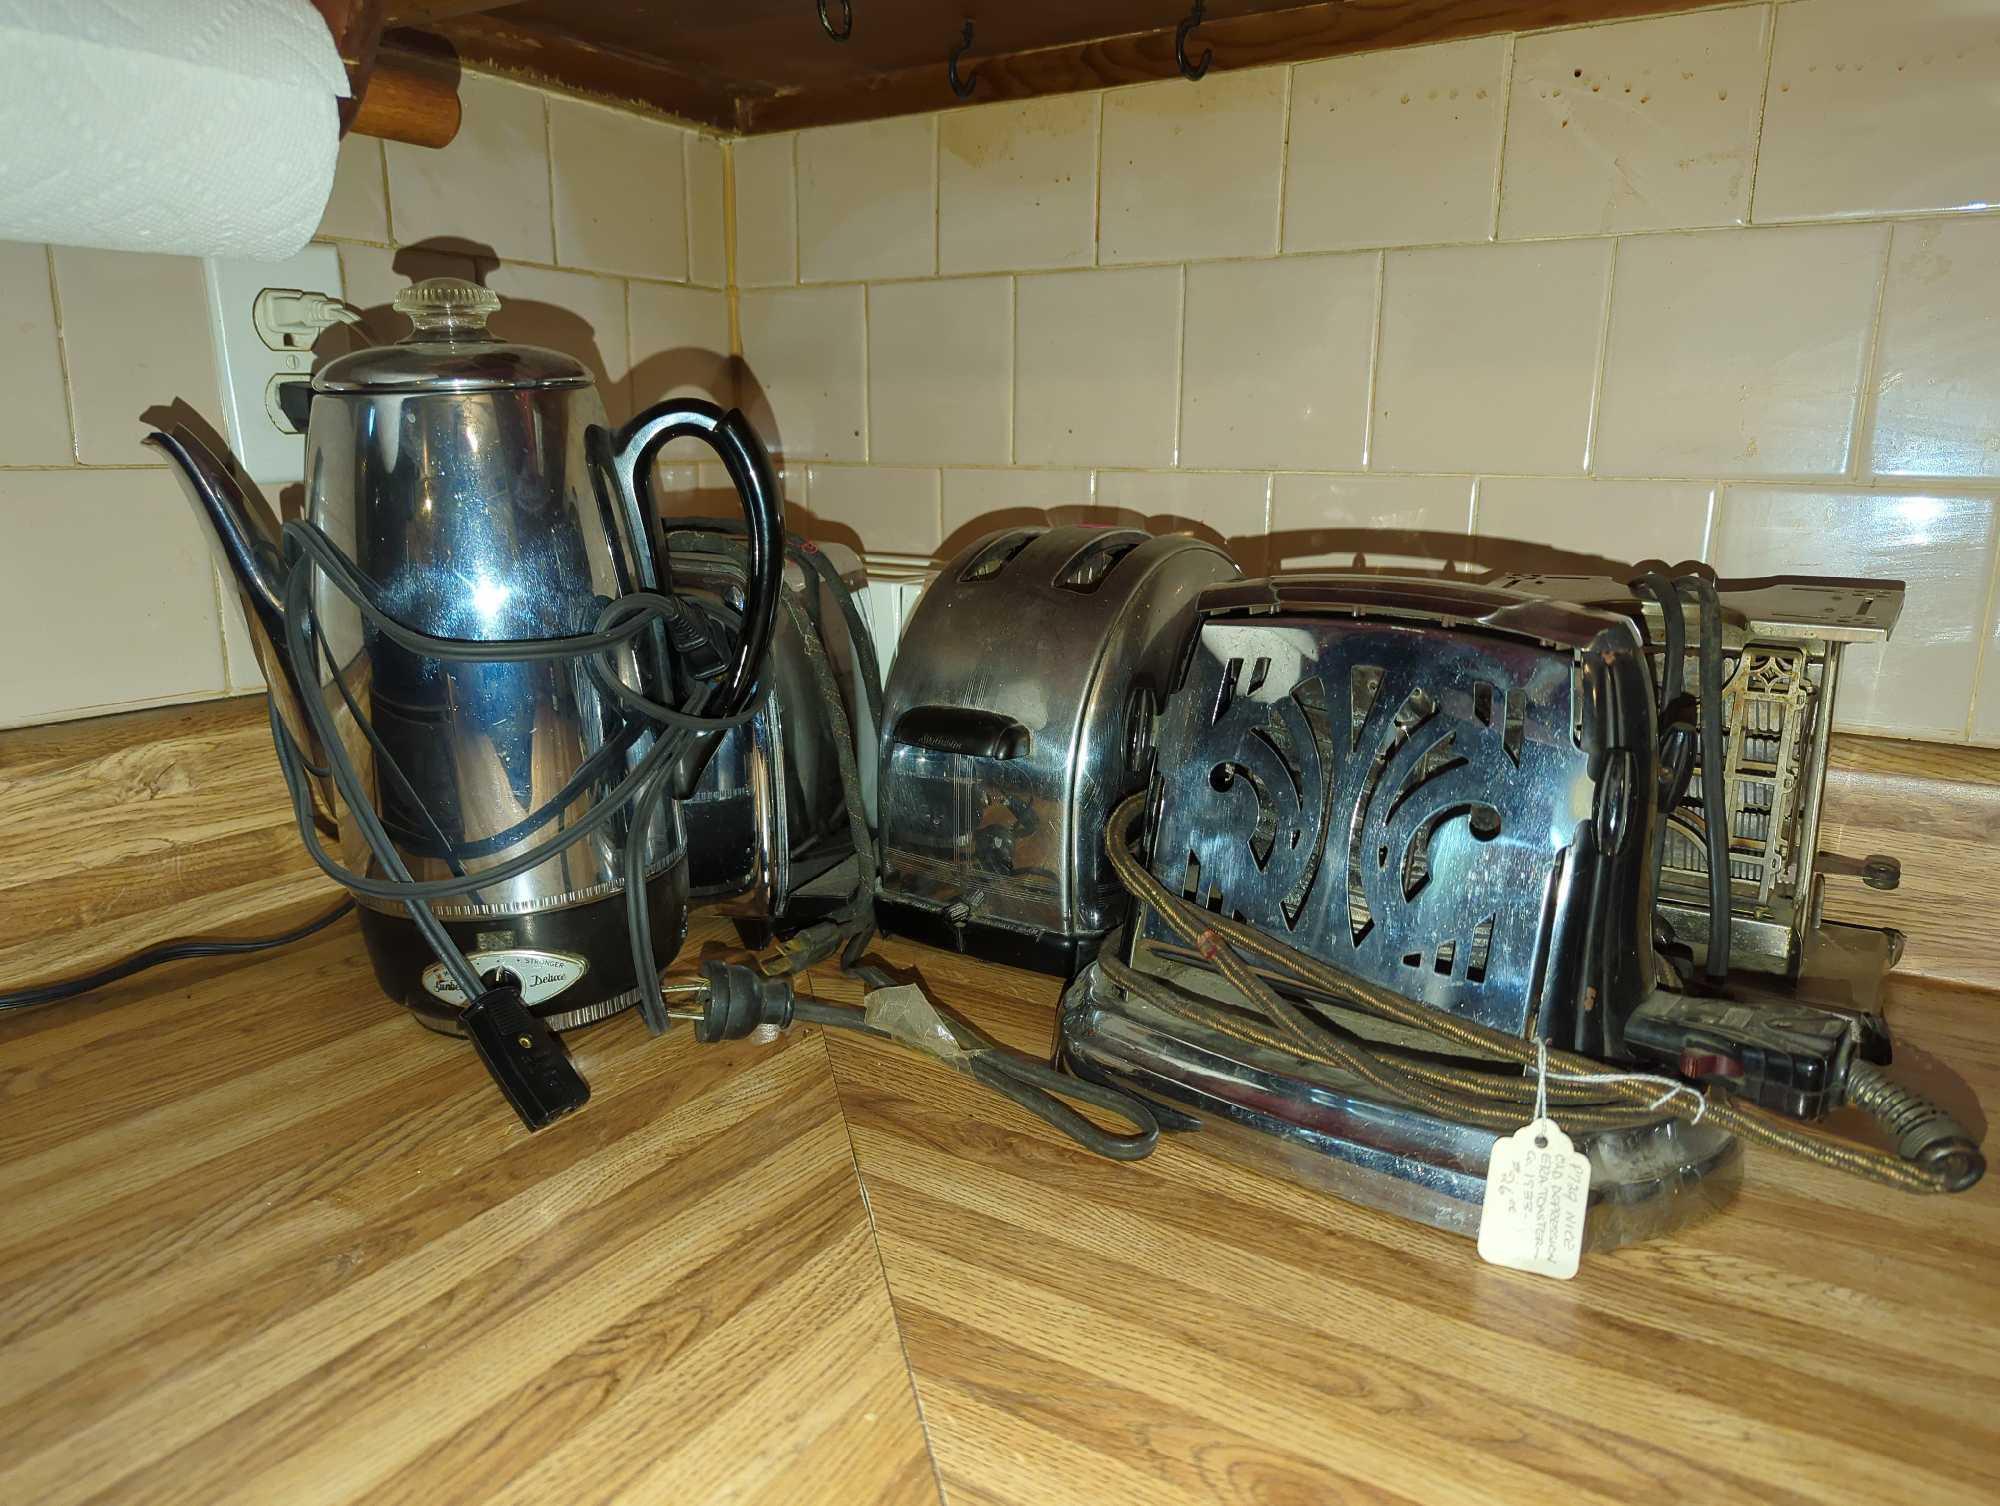 (KIT) LOT OF 6 ASSORTED ITEMS TO INCLUDE, 1939 SUNBEAM T-9 TOASTER, 1920'S MERIDIAN HOMELECTRIC